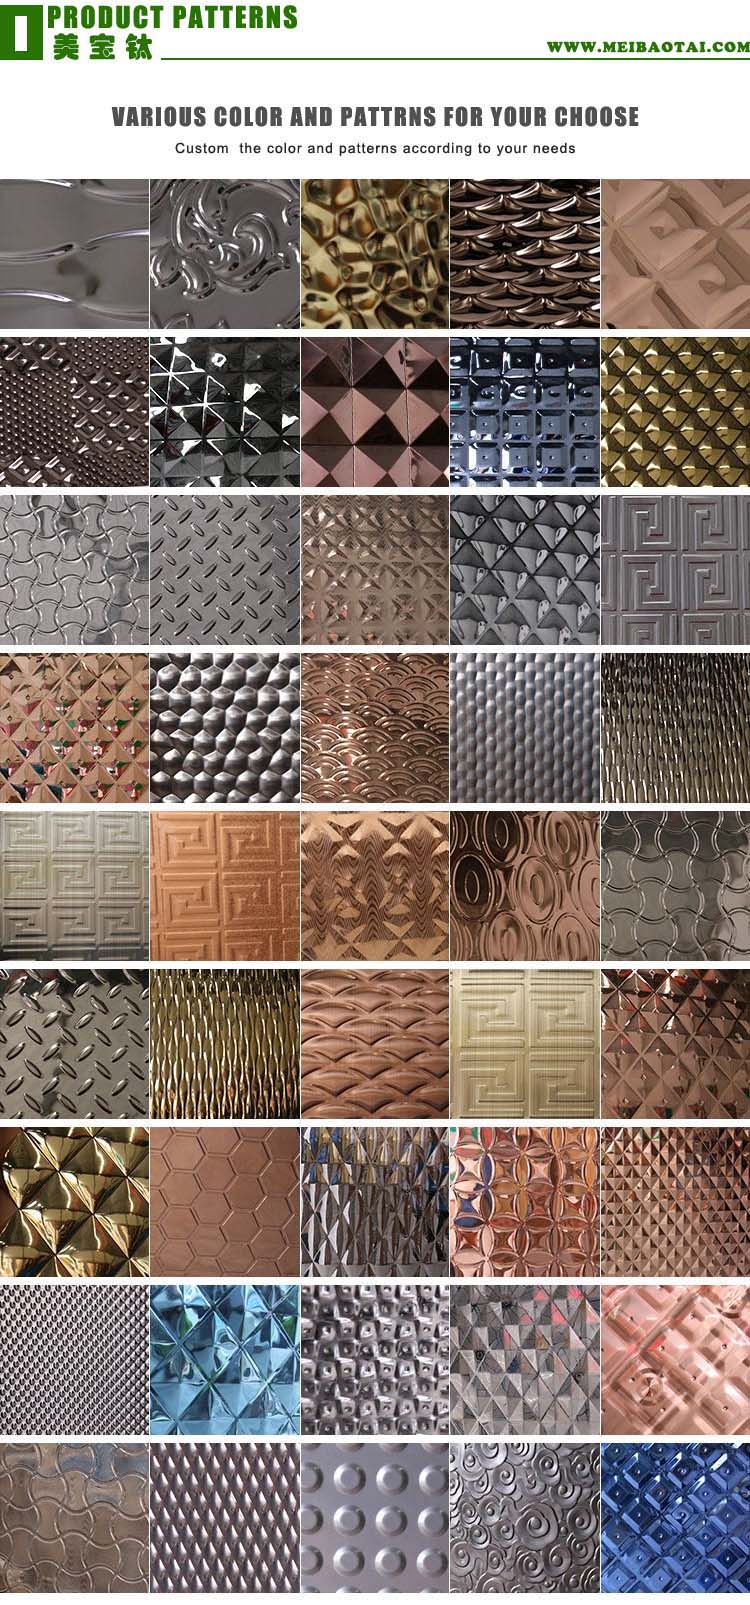 stamped_products_patterns